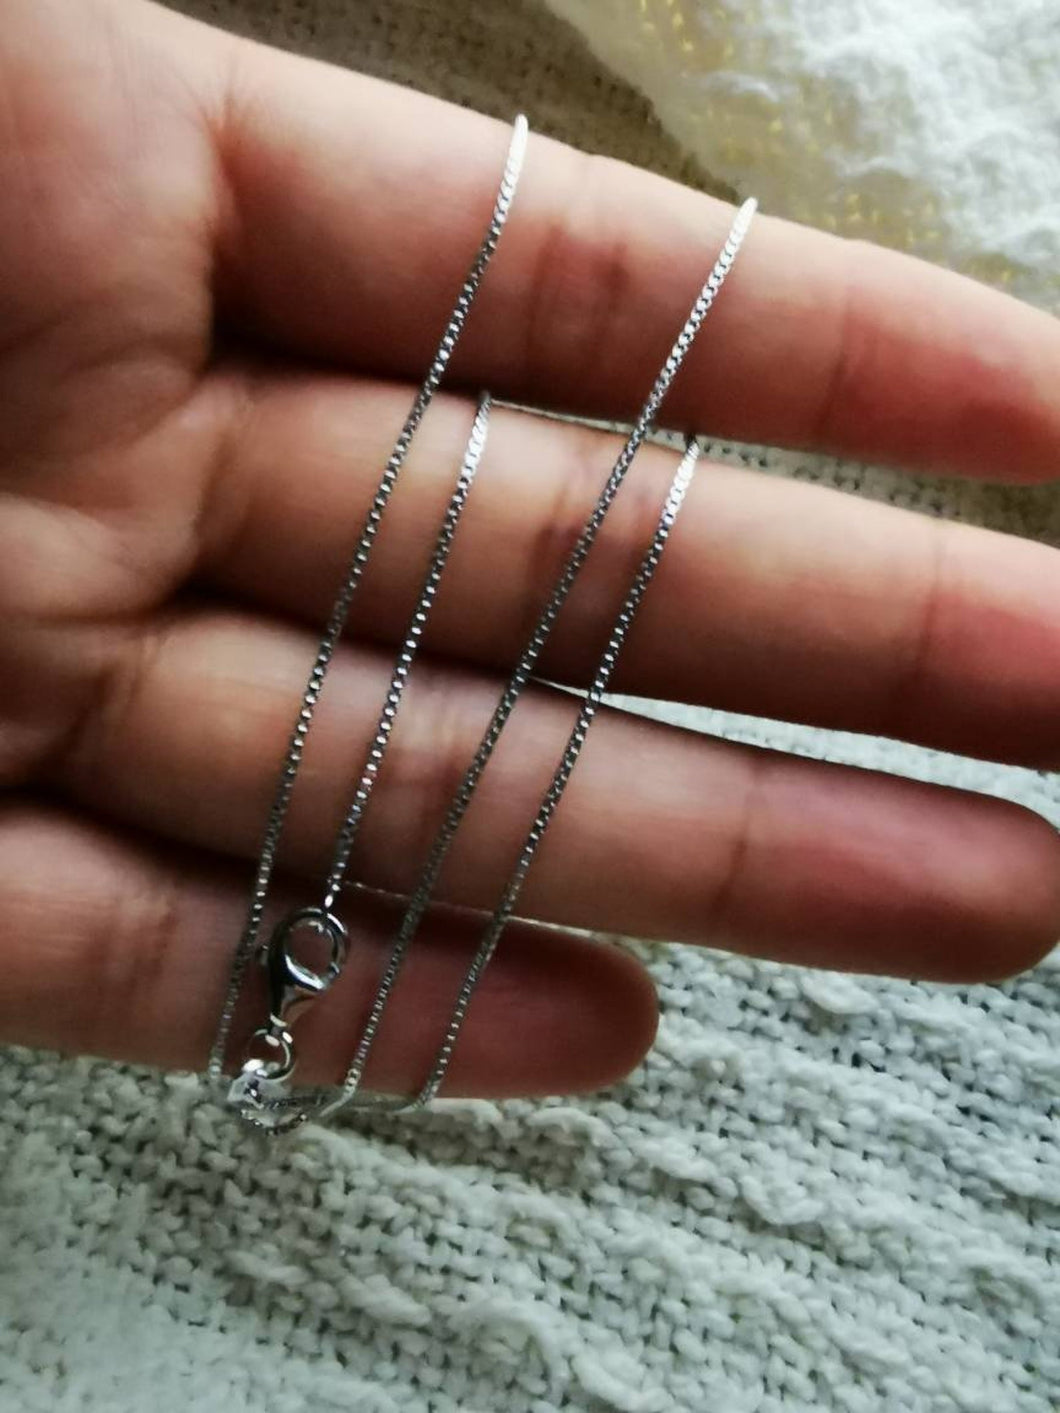 18 Inch Silver Chain, 925 Box Chain, Shimmering Necklace, Simple Silver Chain, Solid Silver Chain, Layered Necklace Set, Stacking Necklace